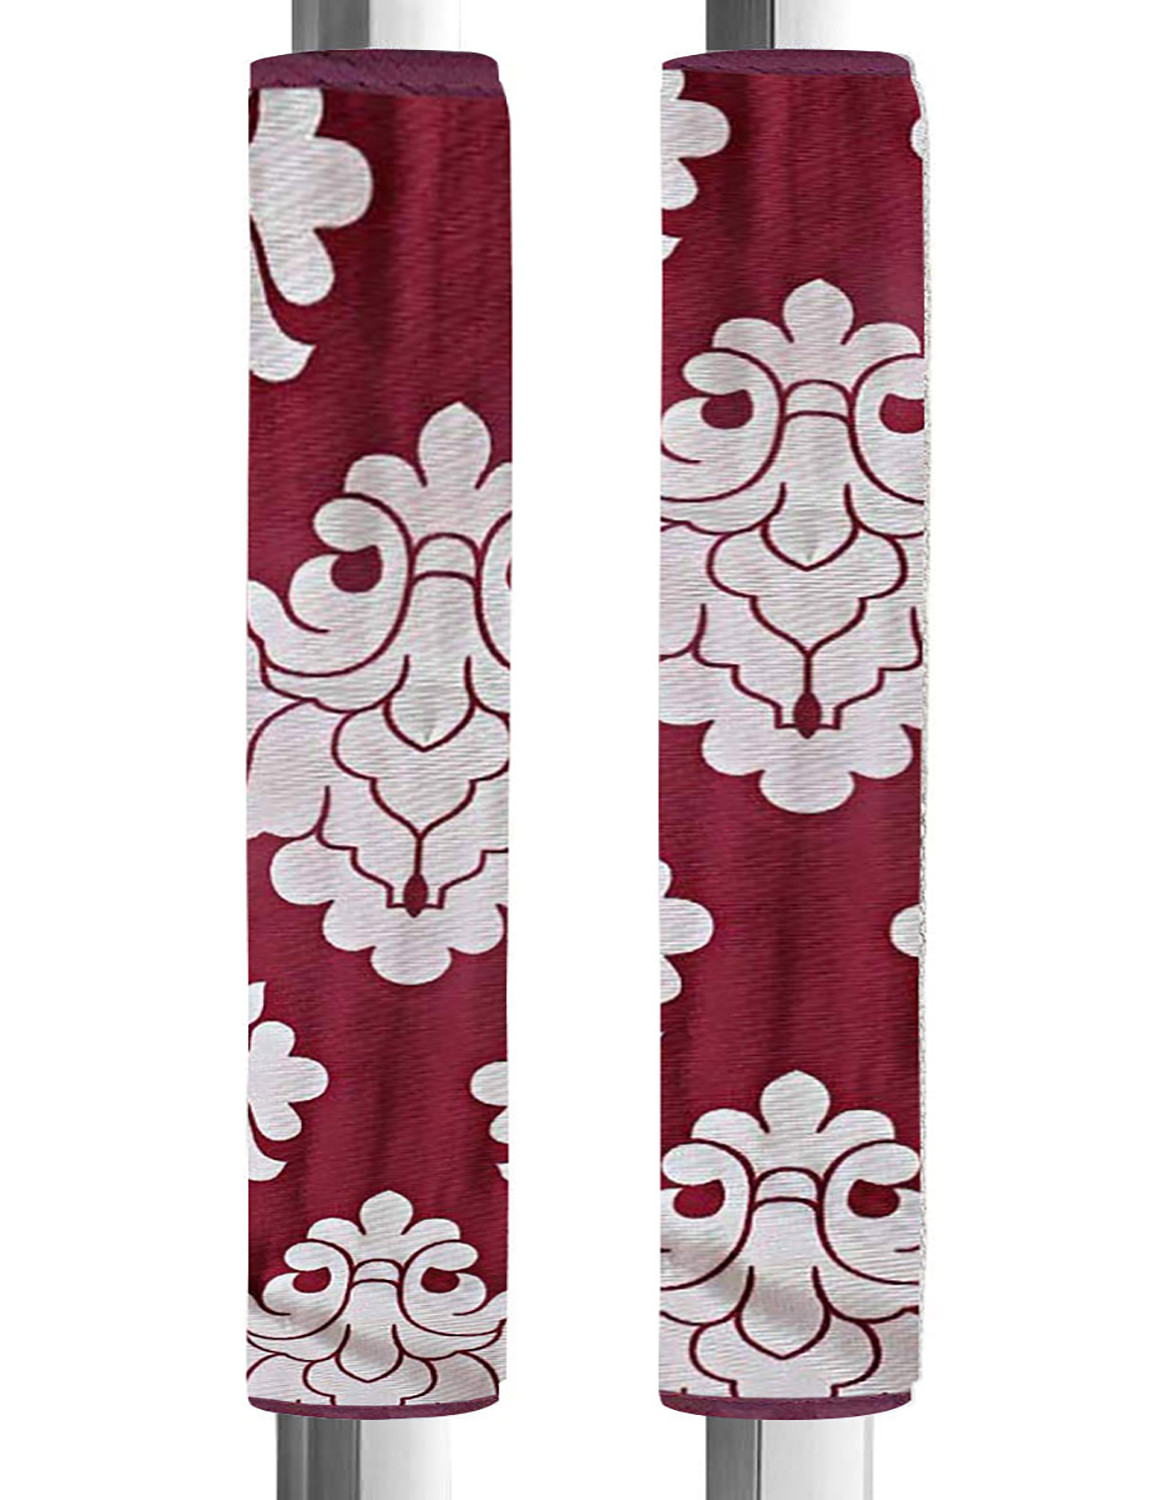 Kuber Industries polyester Floral Print Fridge Handle Cover/Refrigerator Handle Cover For Home & Kitchen Pack Of 2 (Maroon)